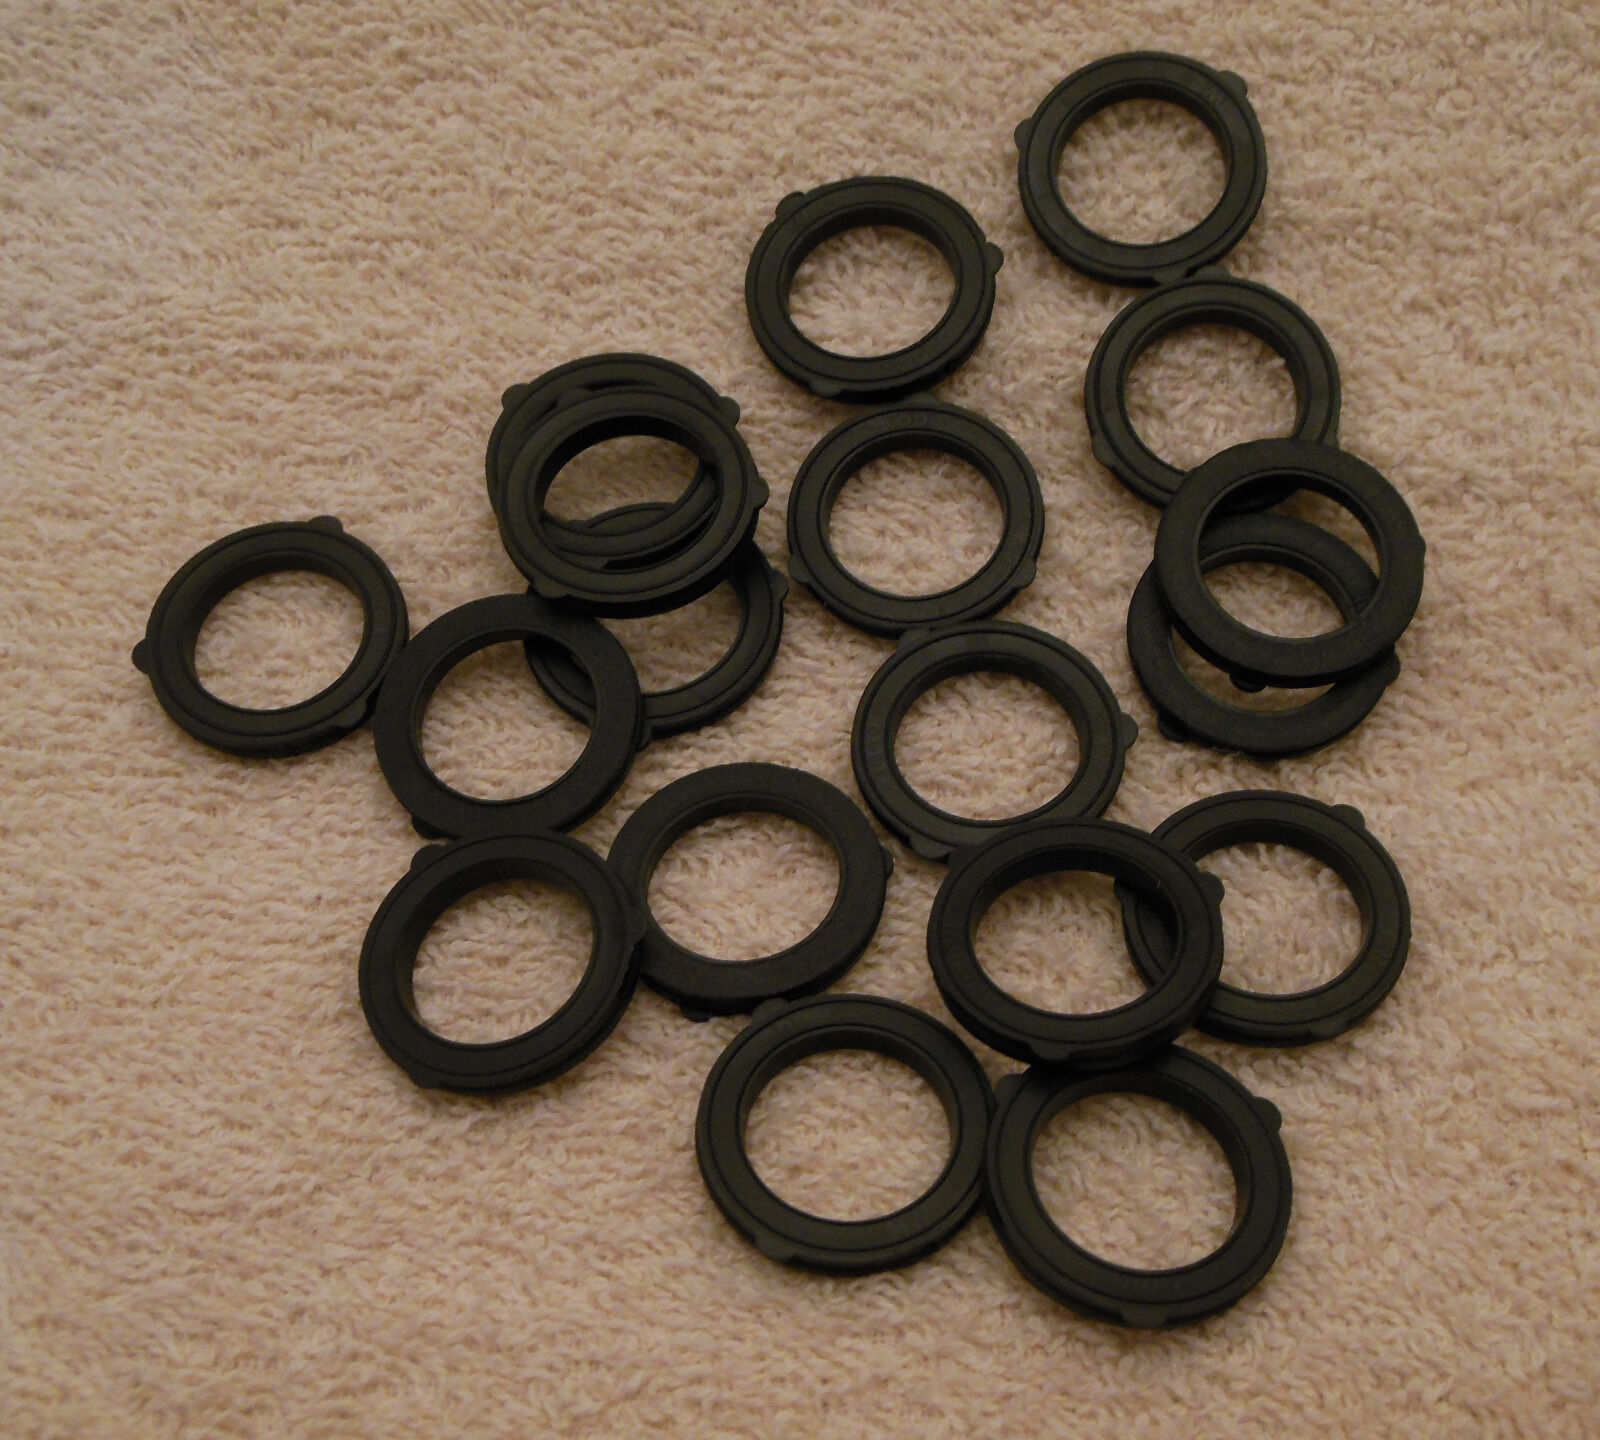 Lot of 18 American Made high quality garden hose washers